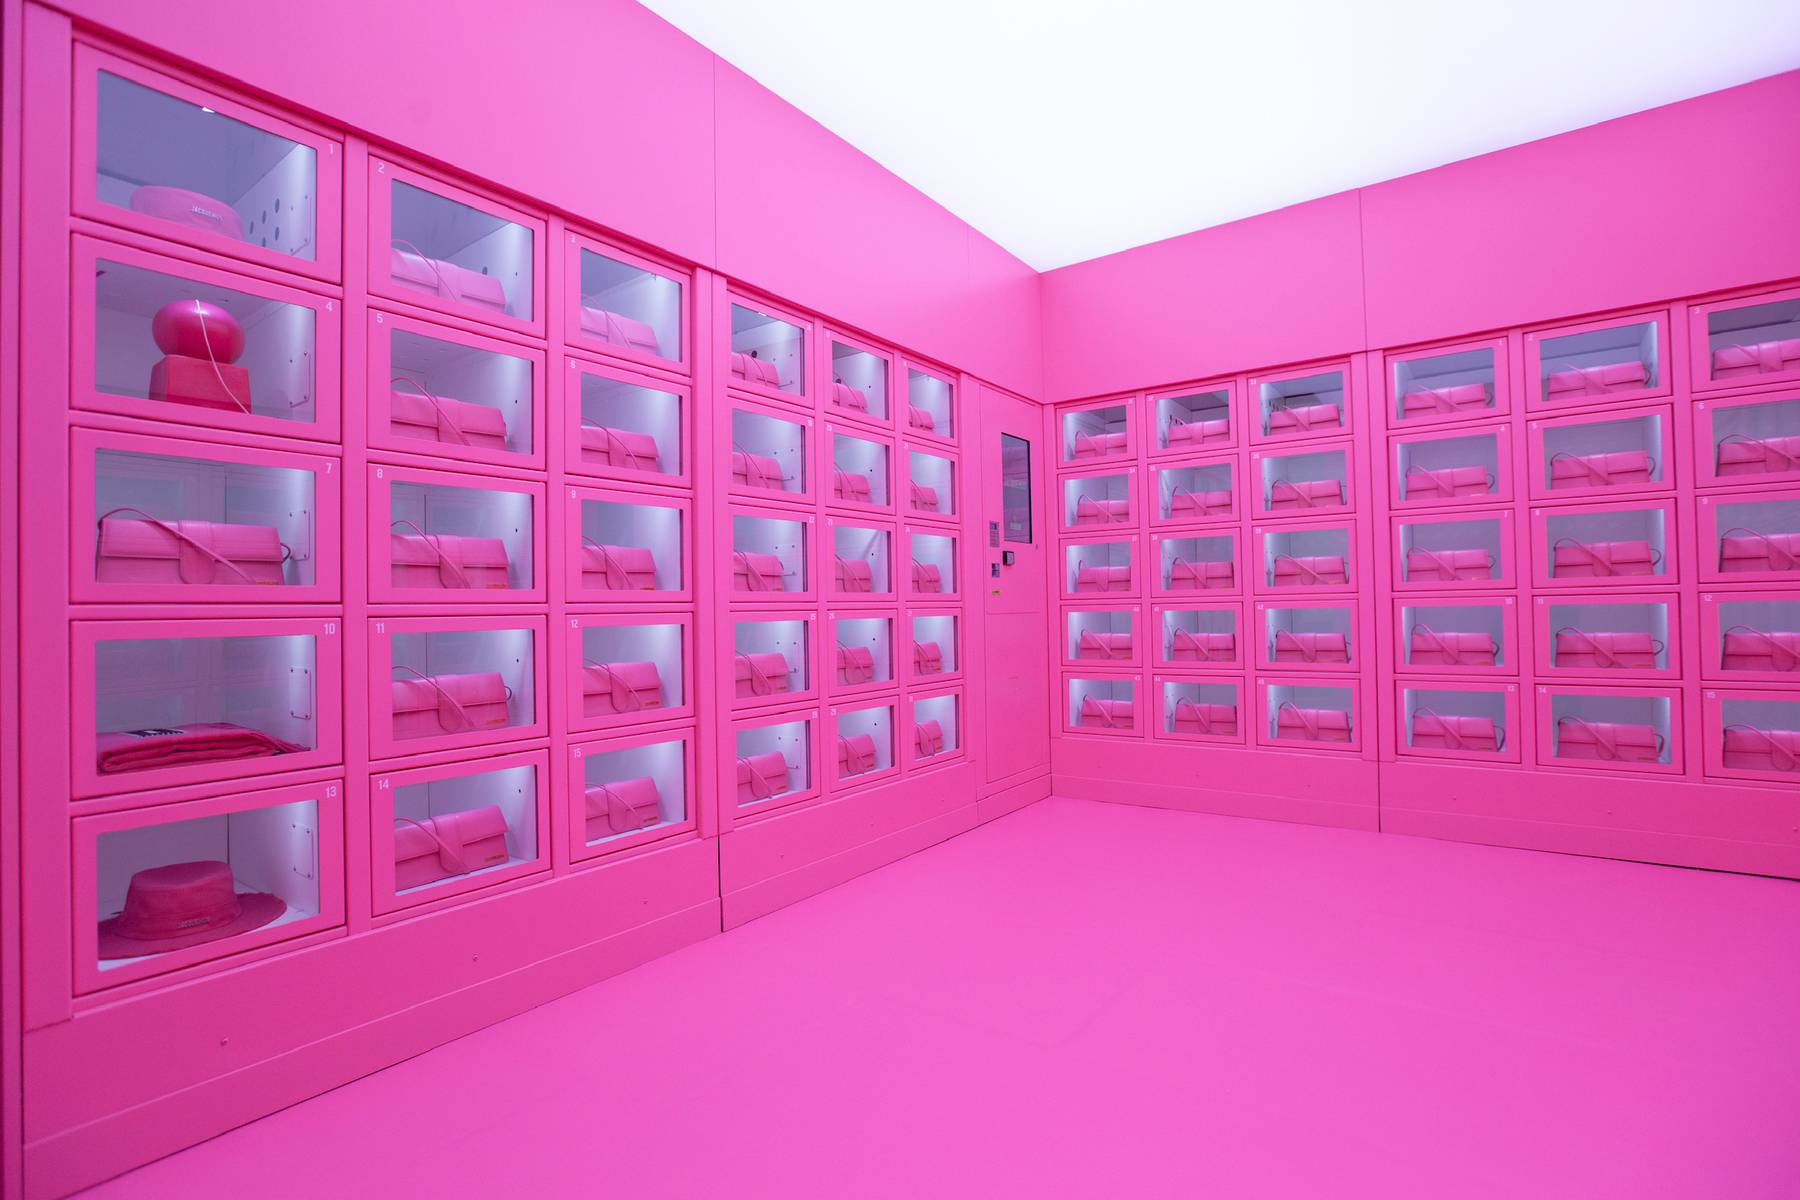 Jacquemus used a 24-hour vending machine concept for temporary boutiques in Paris and Milan.